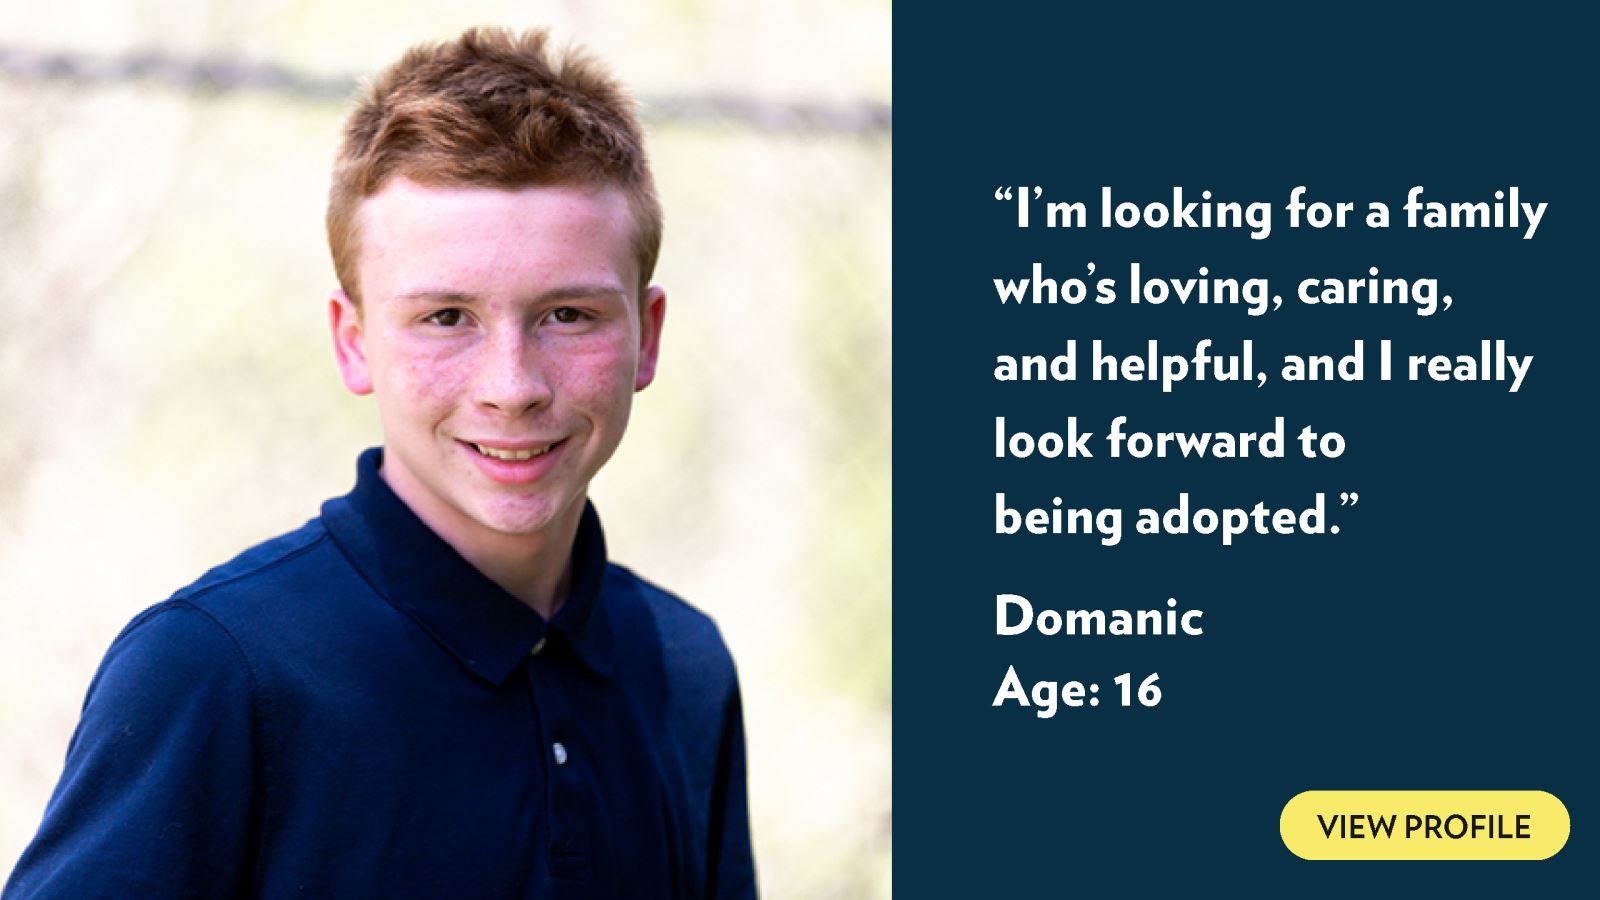 I’m looking for a family who’s loving, caring, and helpful, and I really look forward to being adopted. Domanic, age 16. View profile.